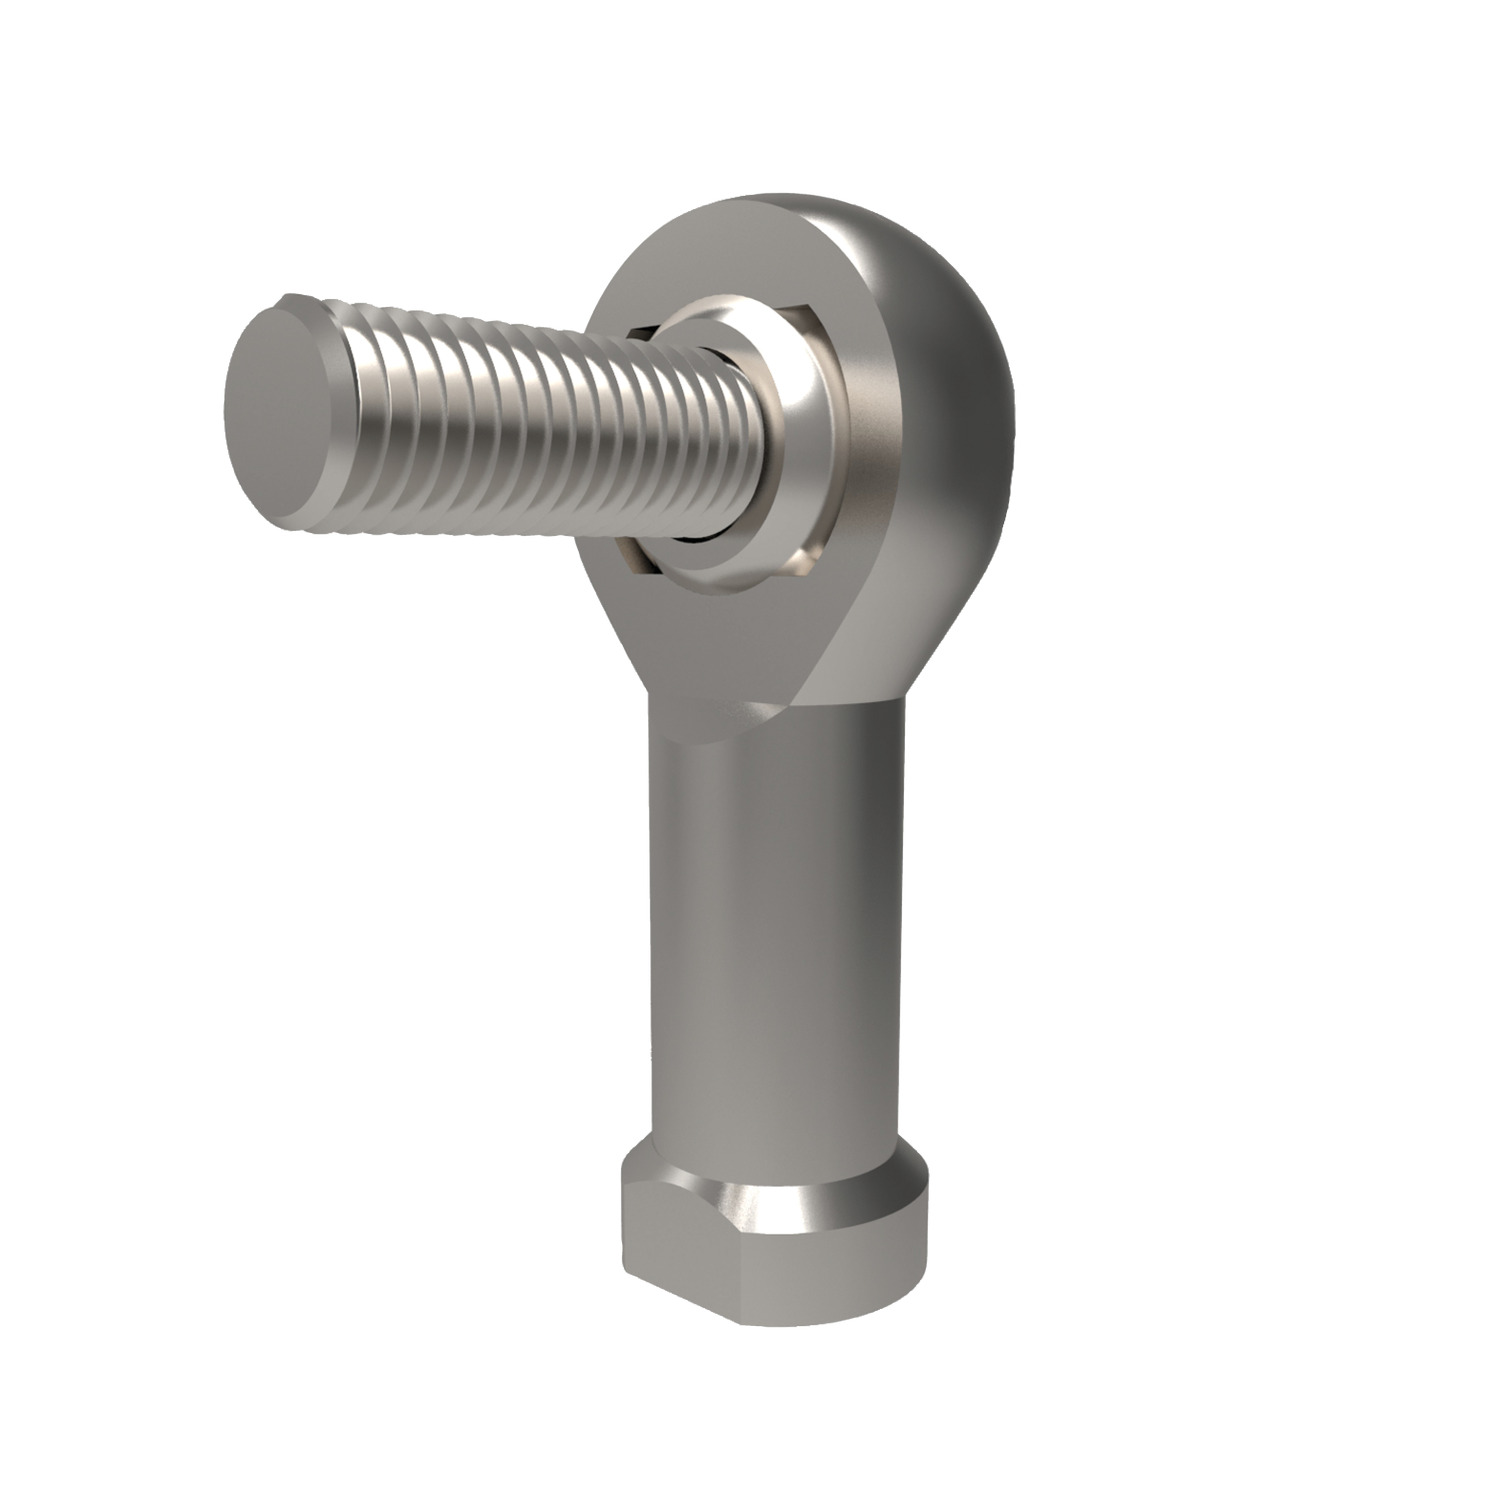 R3610 - Rod End with Stud - Female